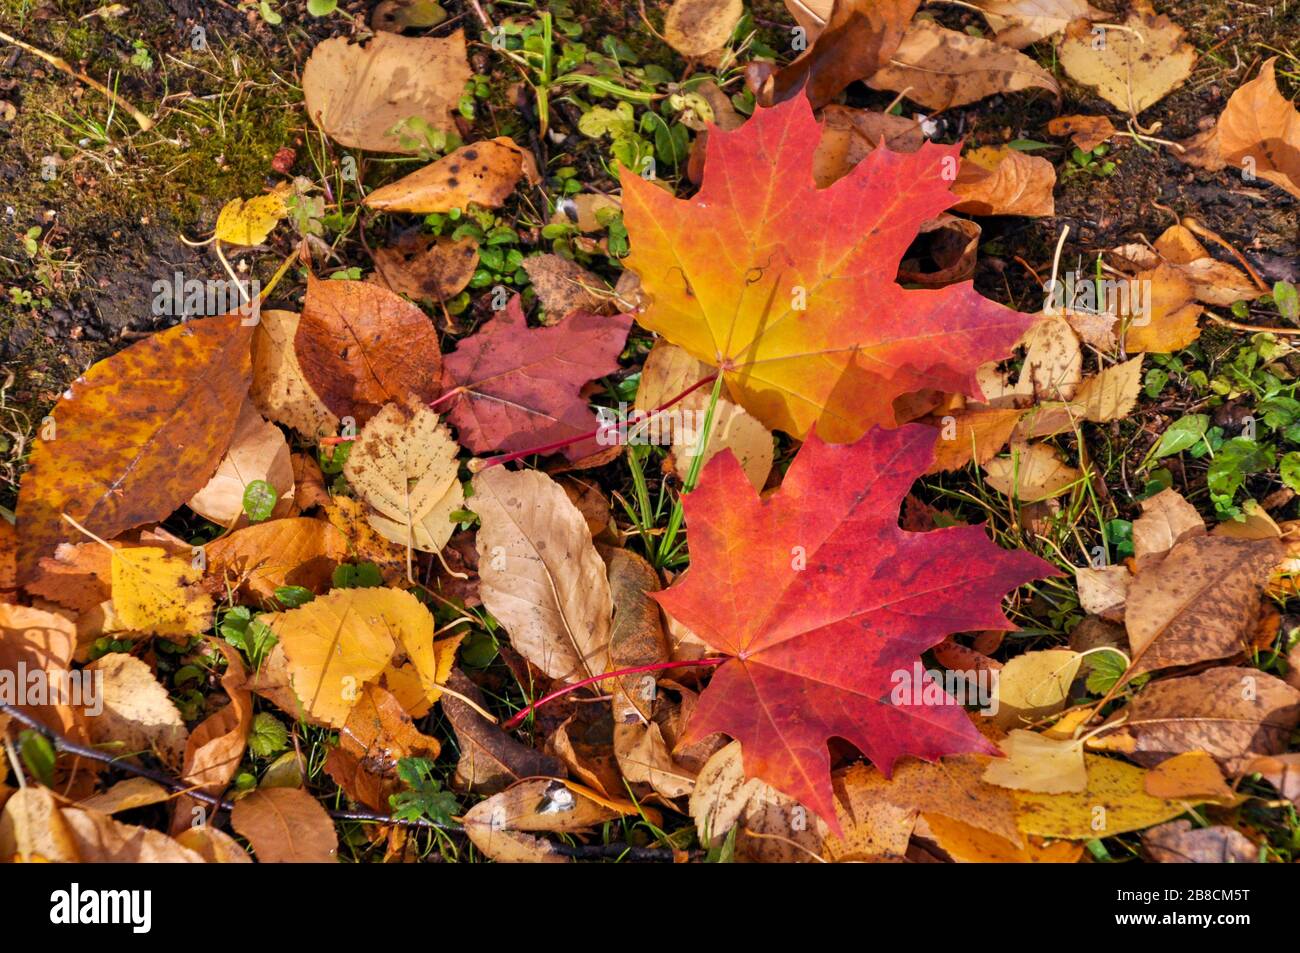 Two colorful maple leaves lying on the ground surrounded by fallen foliage and grass. Stock Photo